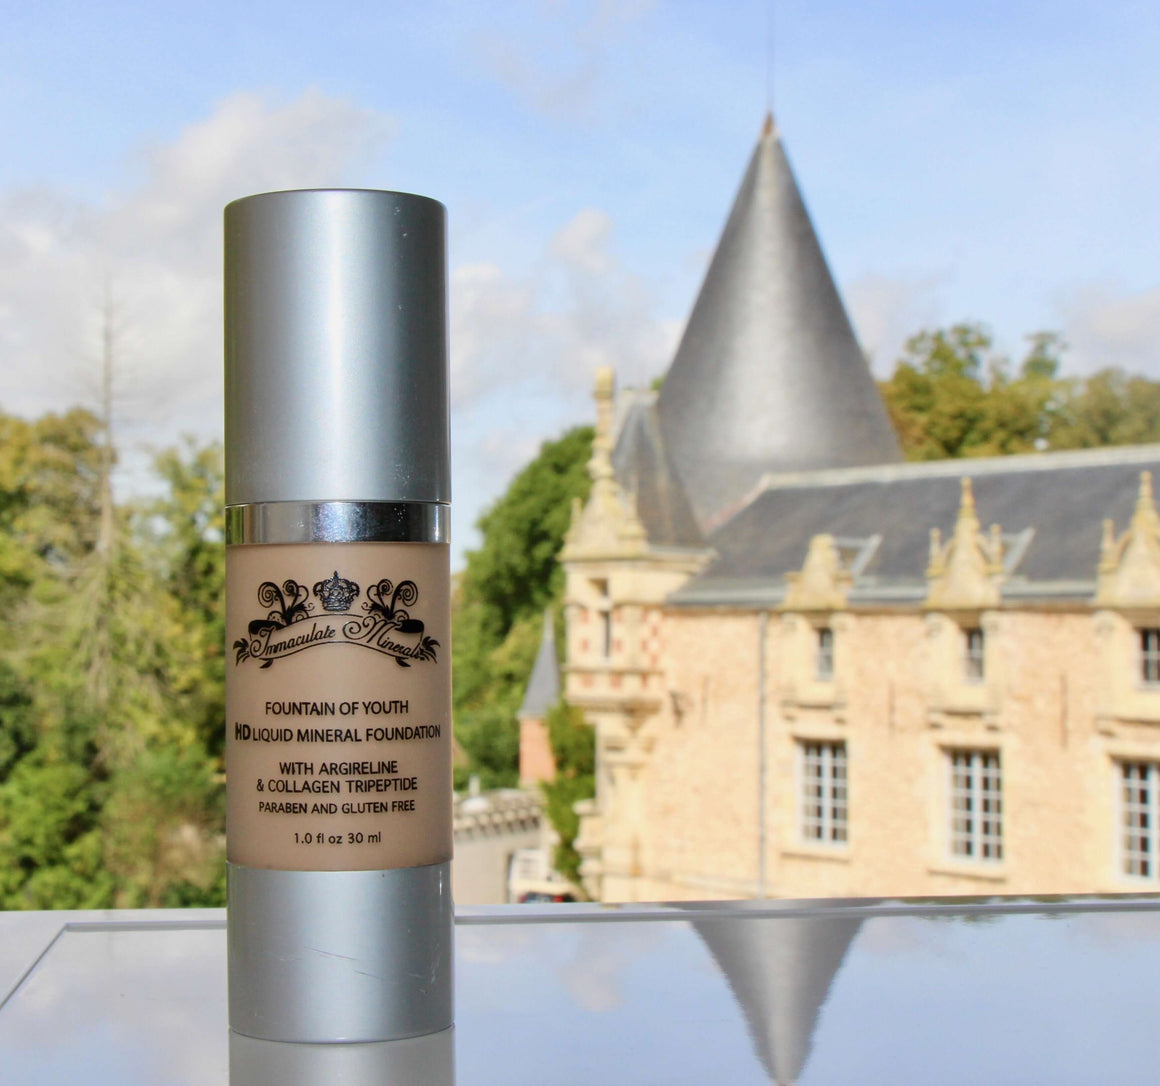 Fountain of Youth HD Liquid Mineral Foundation - Images by Miriam® 